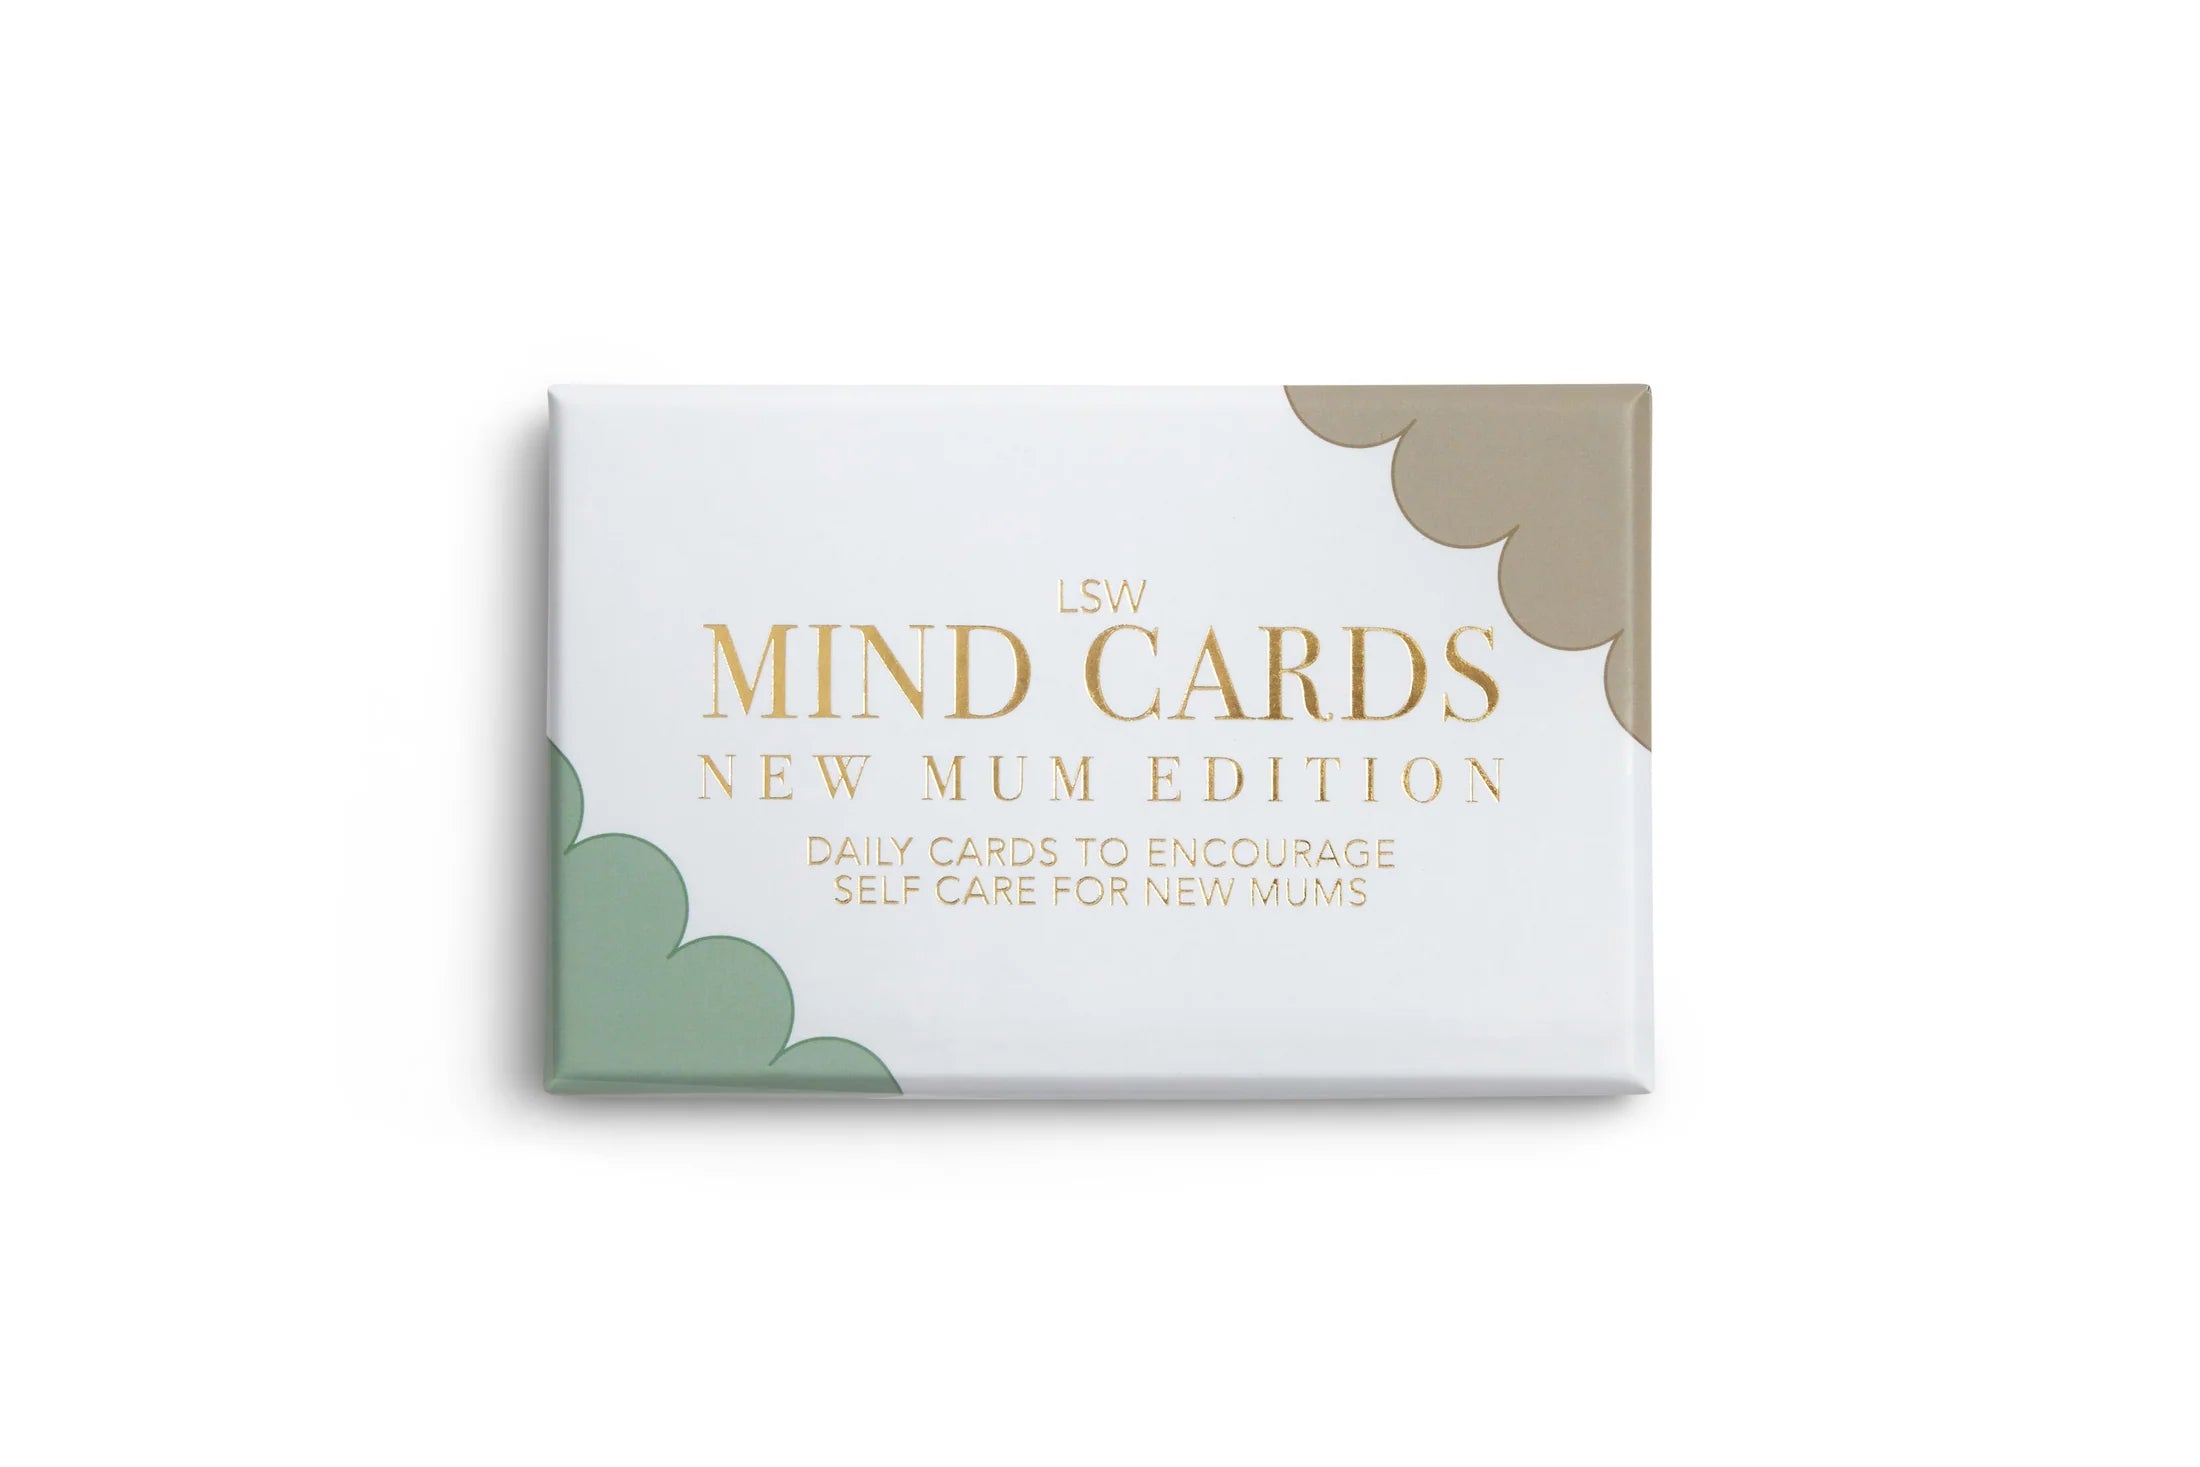 Fabulous Gifts Mind Cards Mum Edition Card by Weirs of Baggot Street